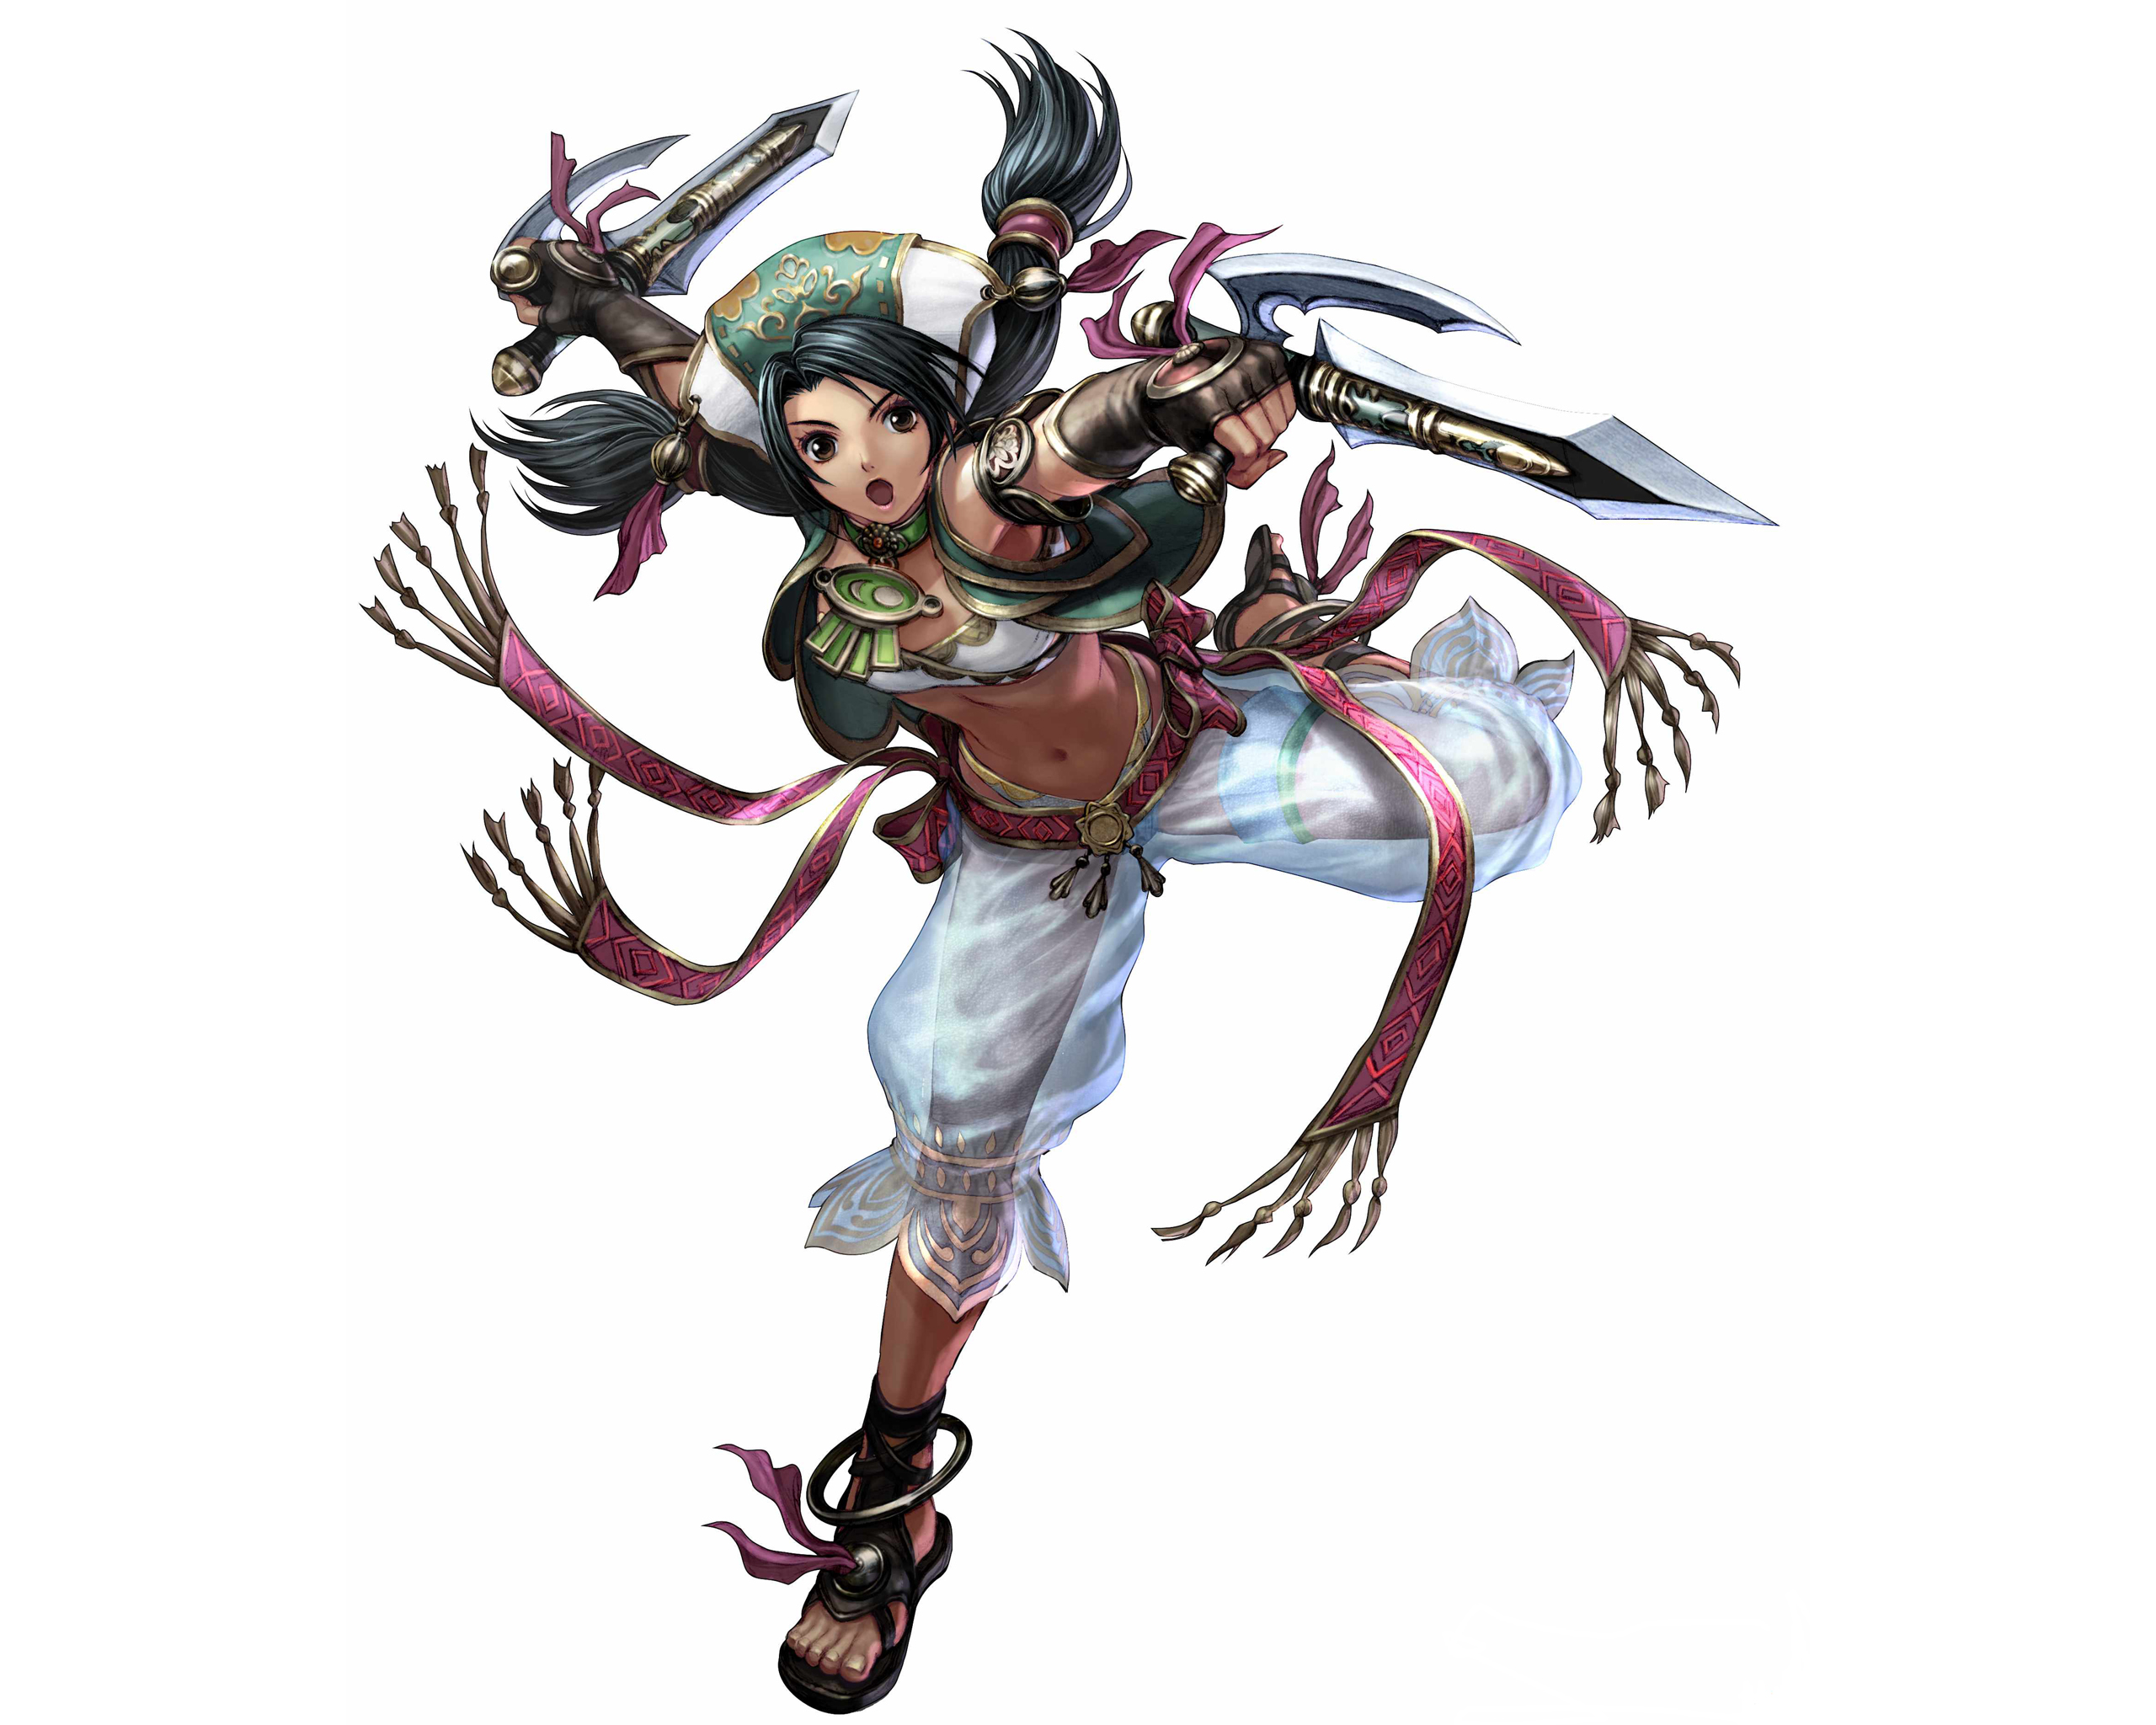 Talim character from SoulCalibur IV video game, ready to battle with her dual blades.